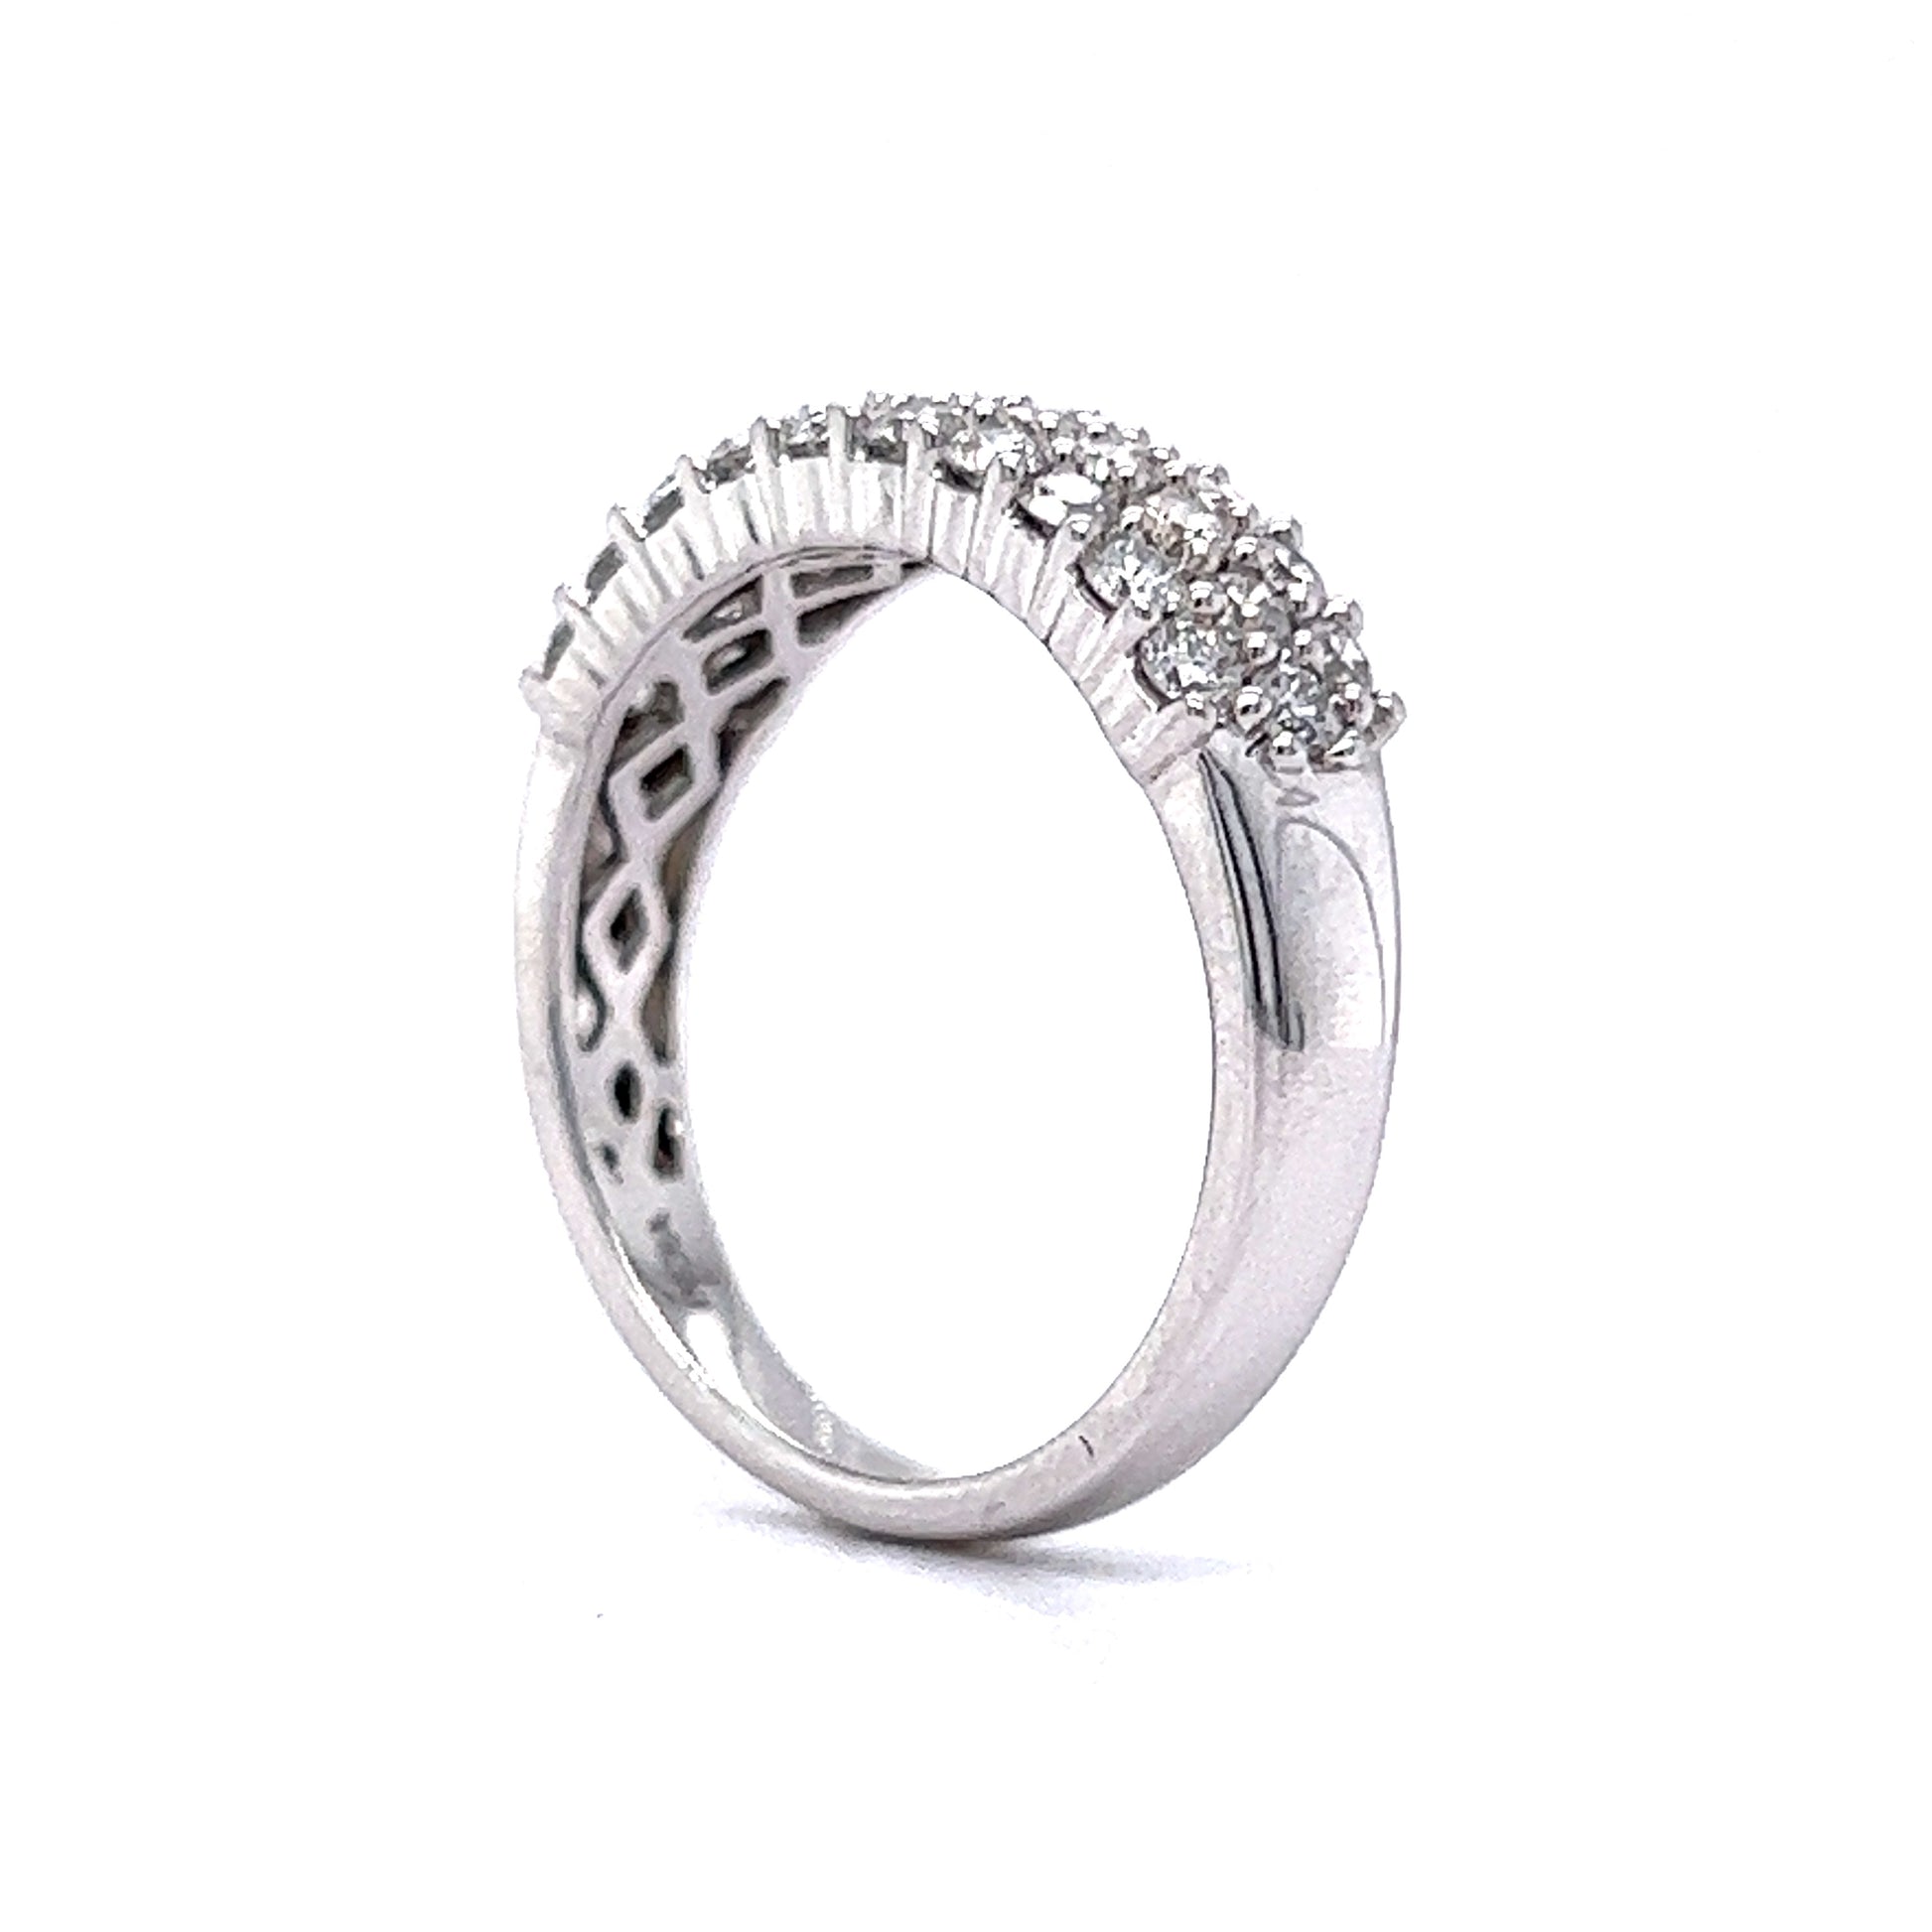 .93 Round Brilliant Diamond Pave Band in 14k White GoldComposition: 14 Karat White Gold Ring Size: 7.0 Total Diamond Weight: .93ct Total Gram Weight: 4.1 g Inscription: UD 14K INDIA
      